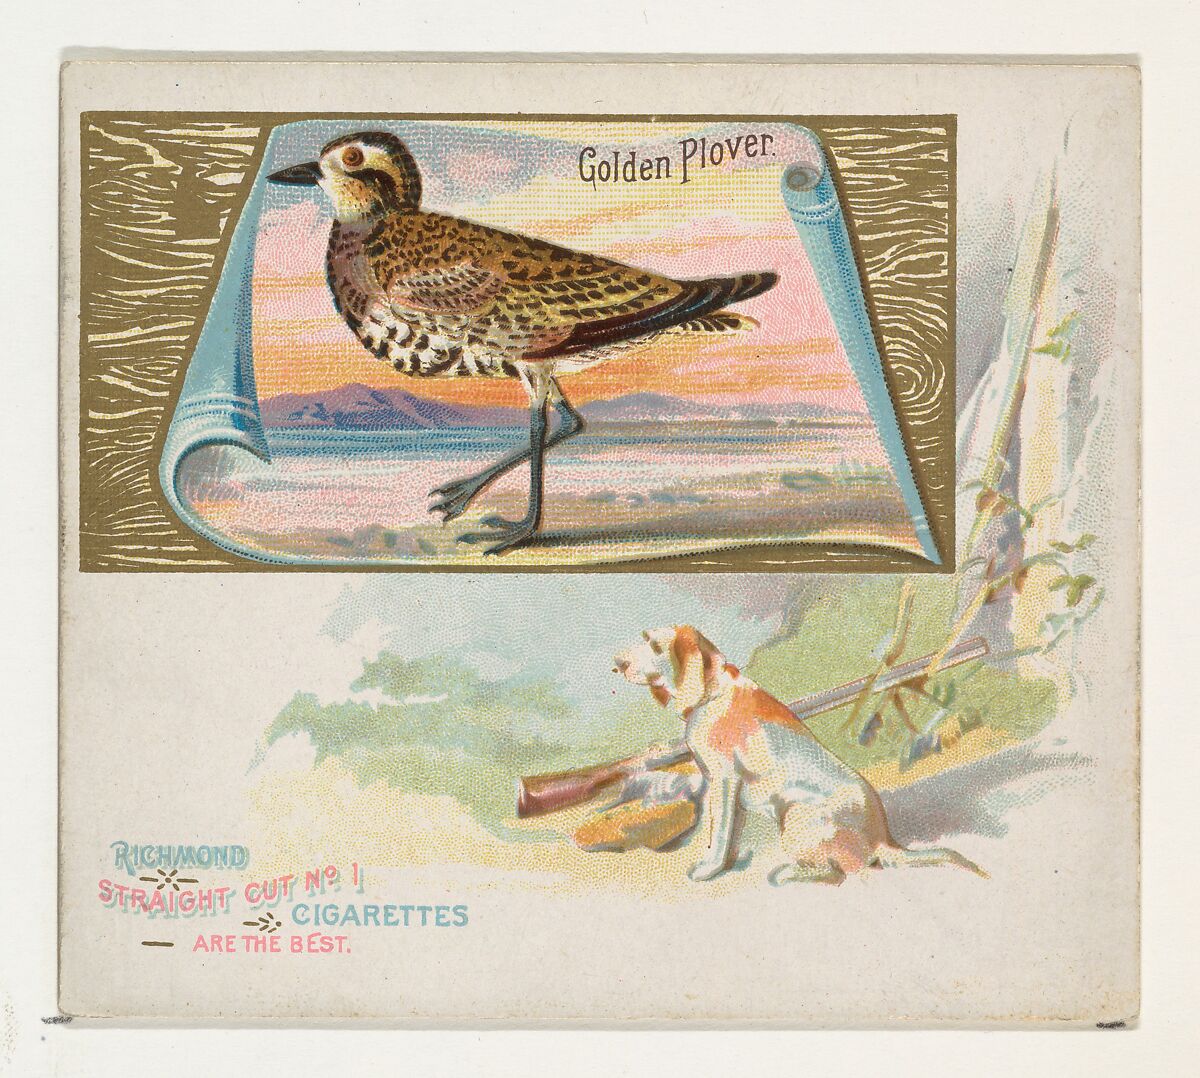 Golden Plover, from the Game Birds series (N40) for Allen & Ginter Cigarettes, Issued by Allen &amp; Ginter (American, Richmond, Virginia), Commercial color lithograph 